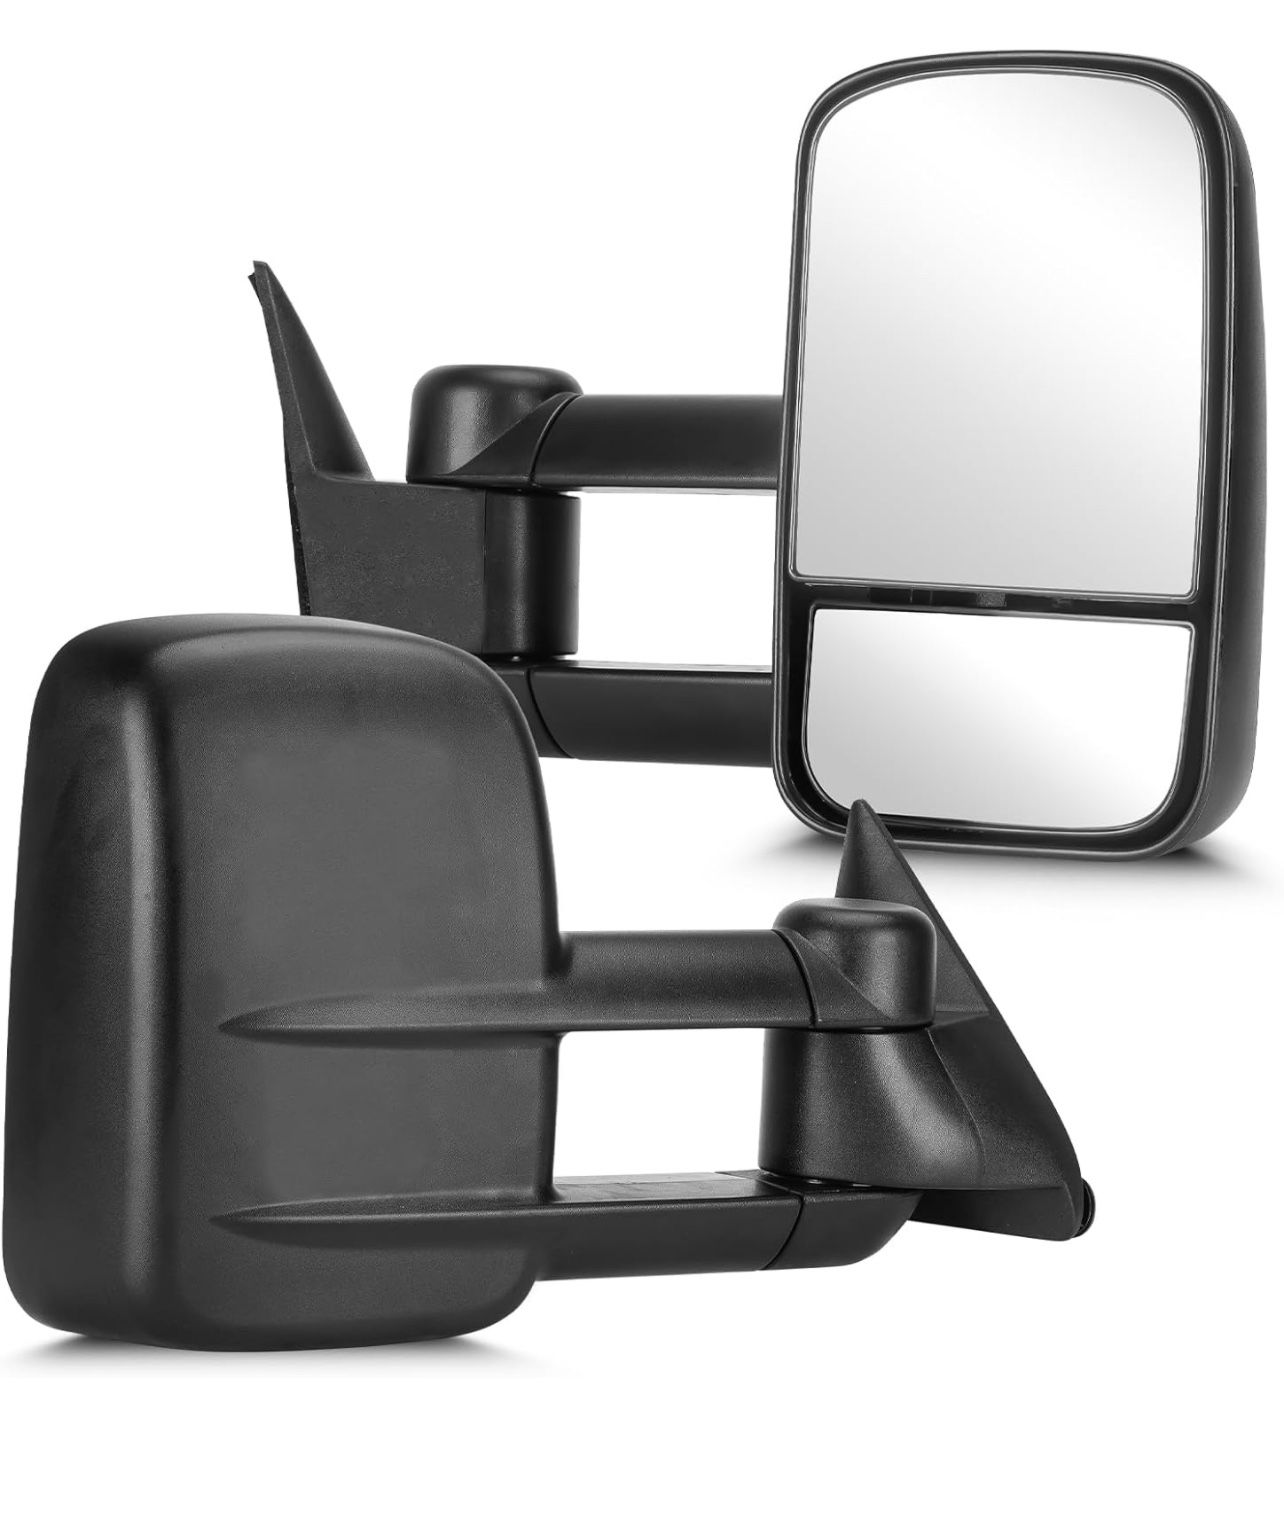 Towing Mirrors - See Description For Fit